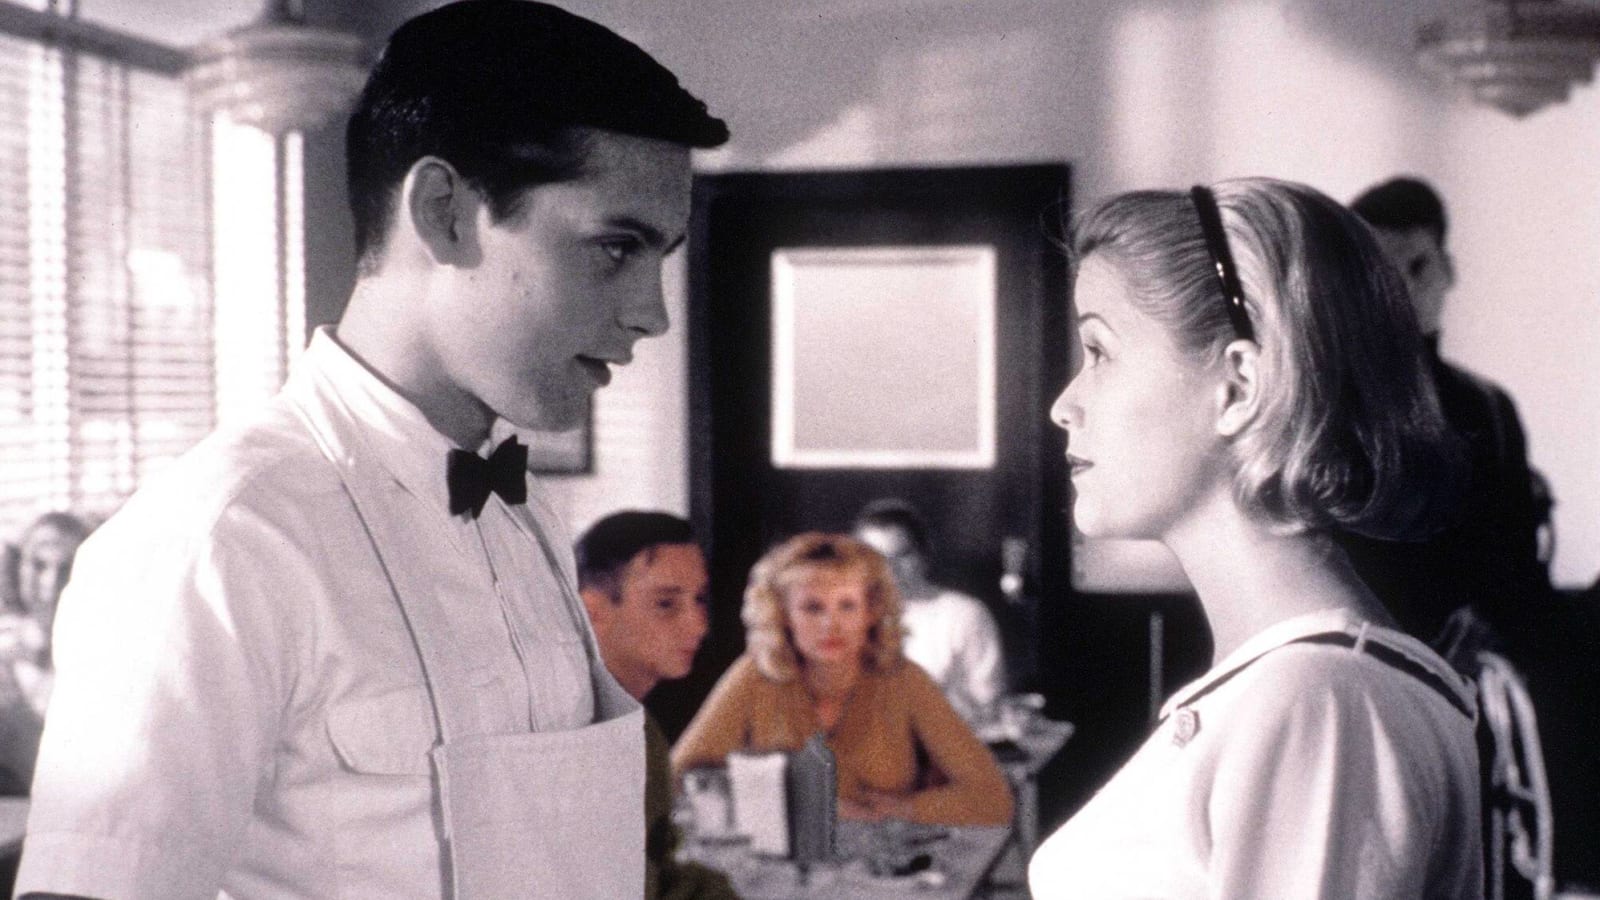 20 fact you might not know about 'Pleasantville'